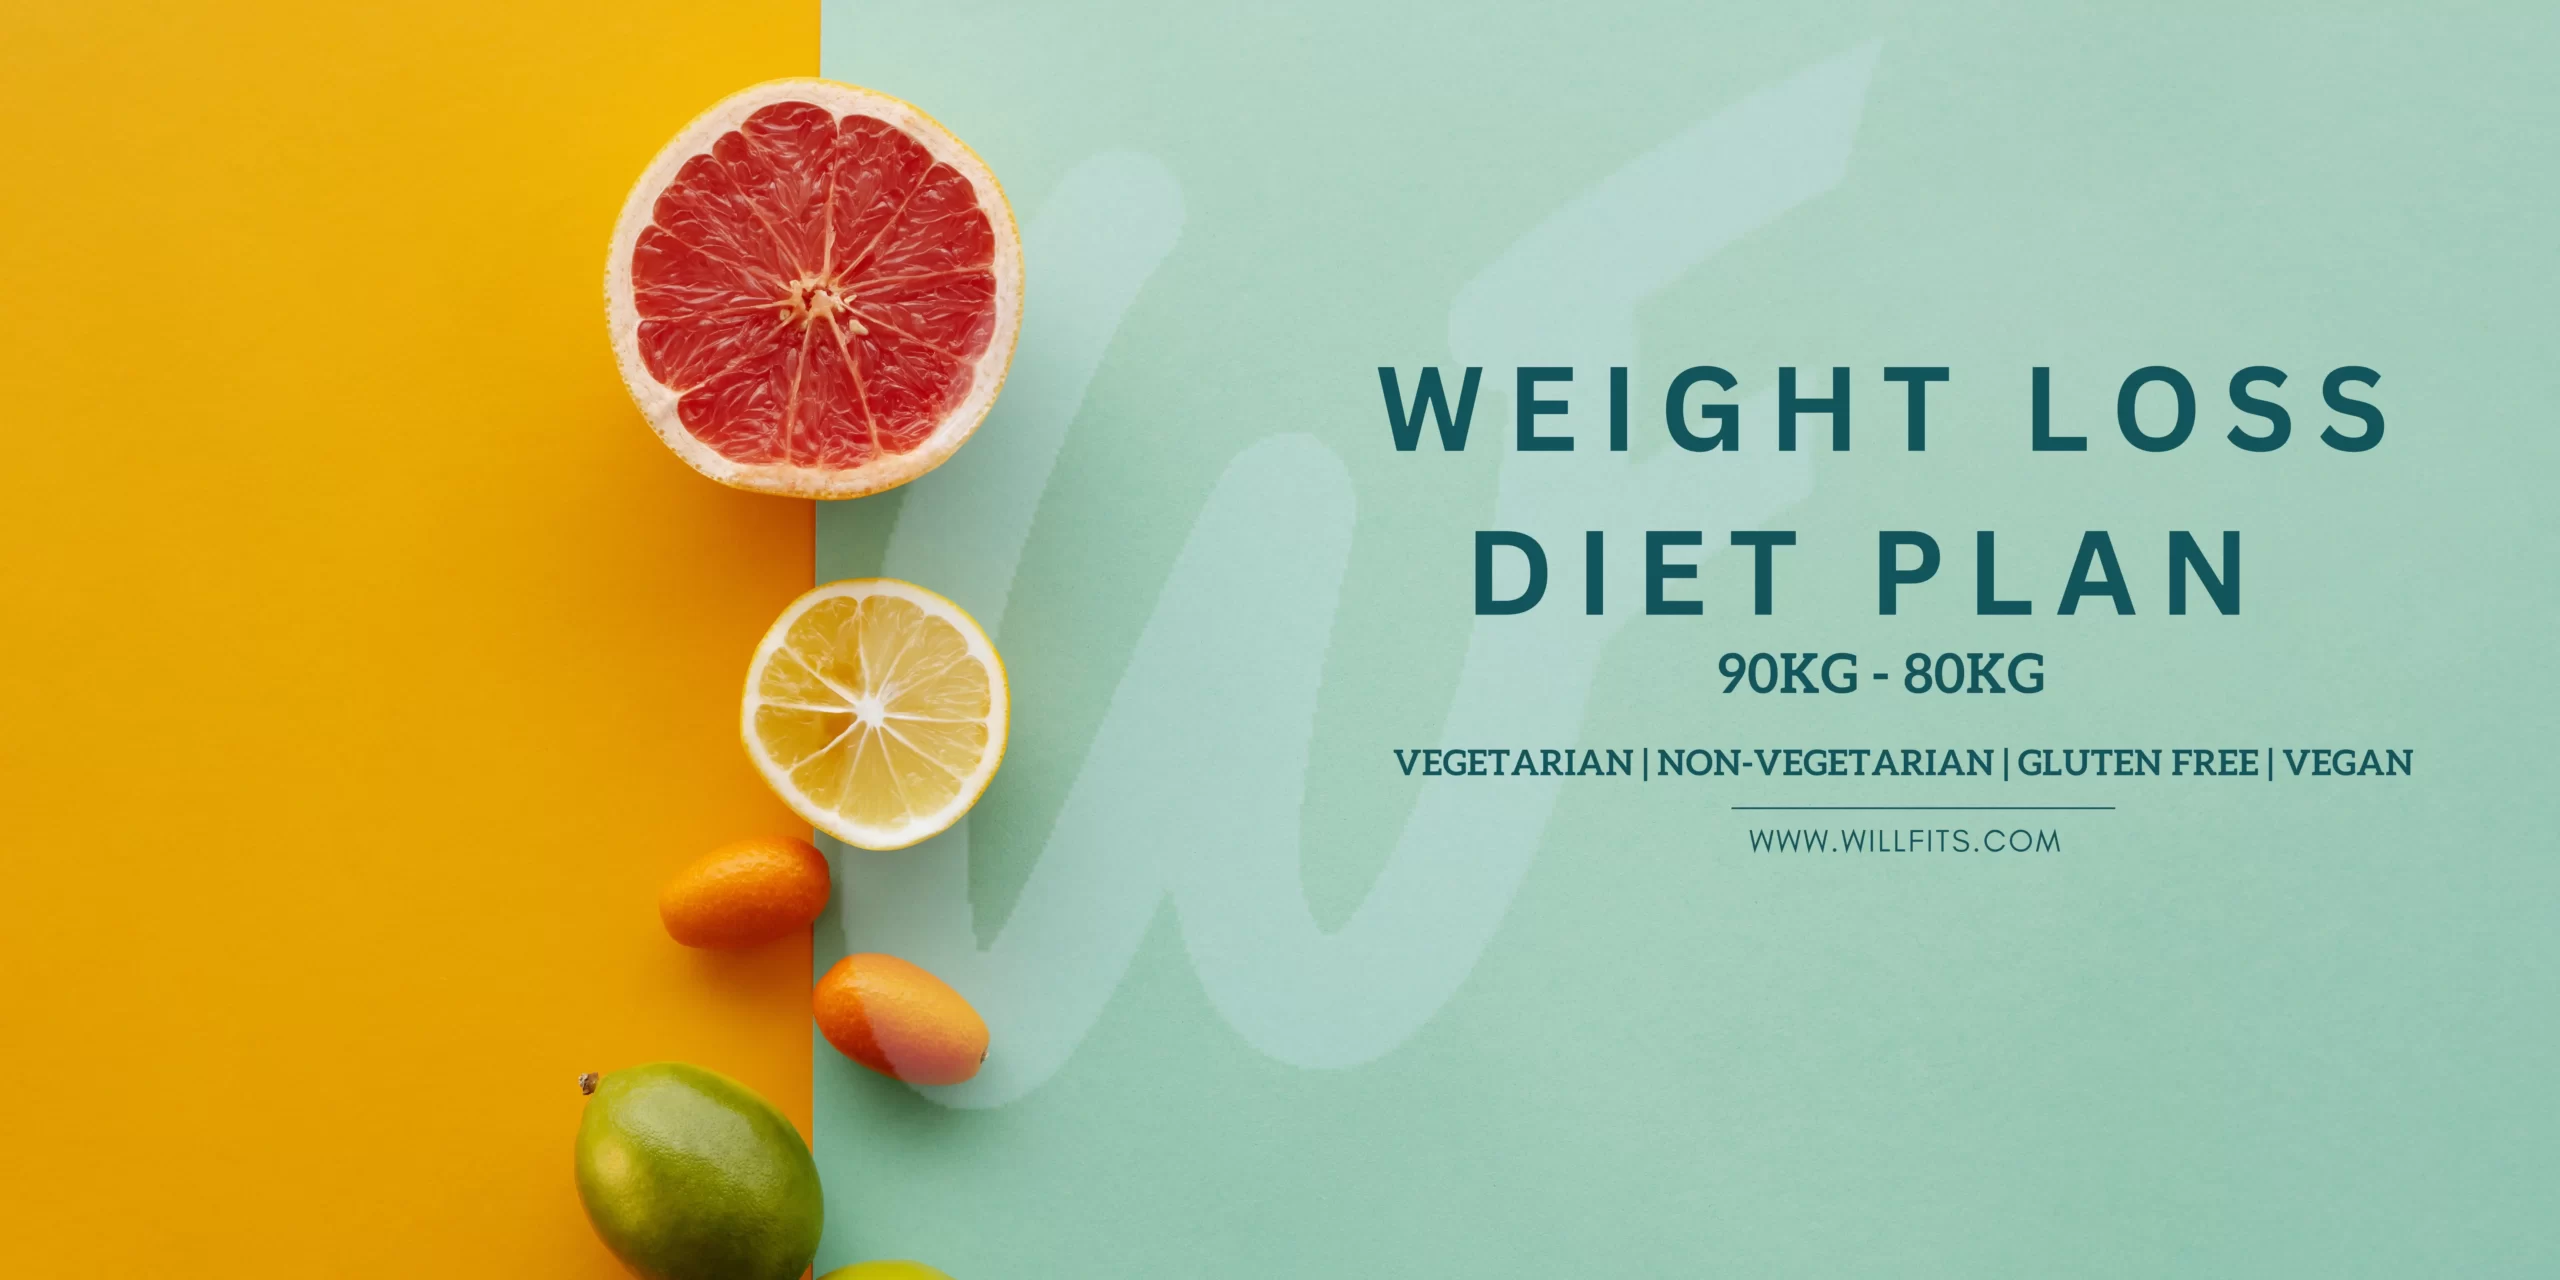 Weight Loss Diet Plan 90KG - 80KG With Willfits.com